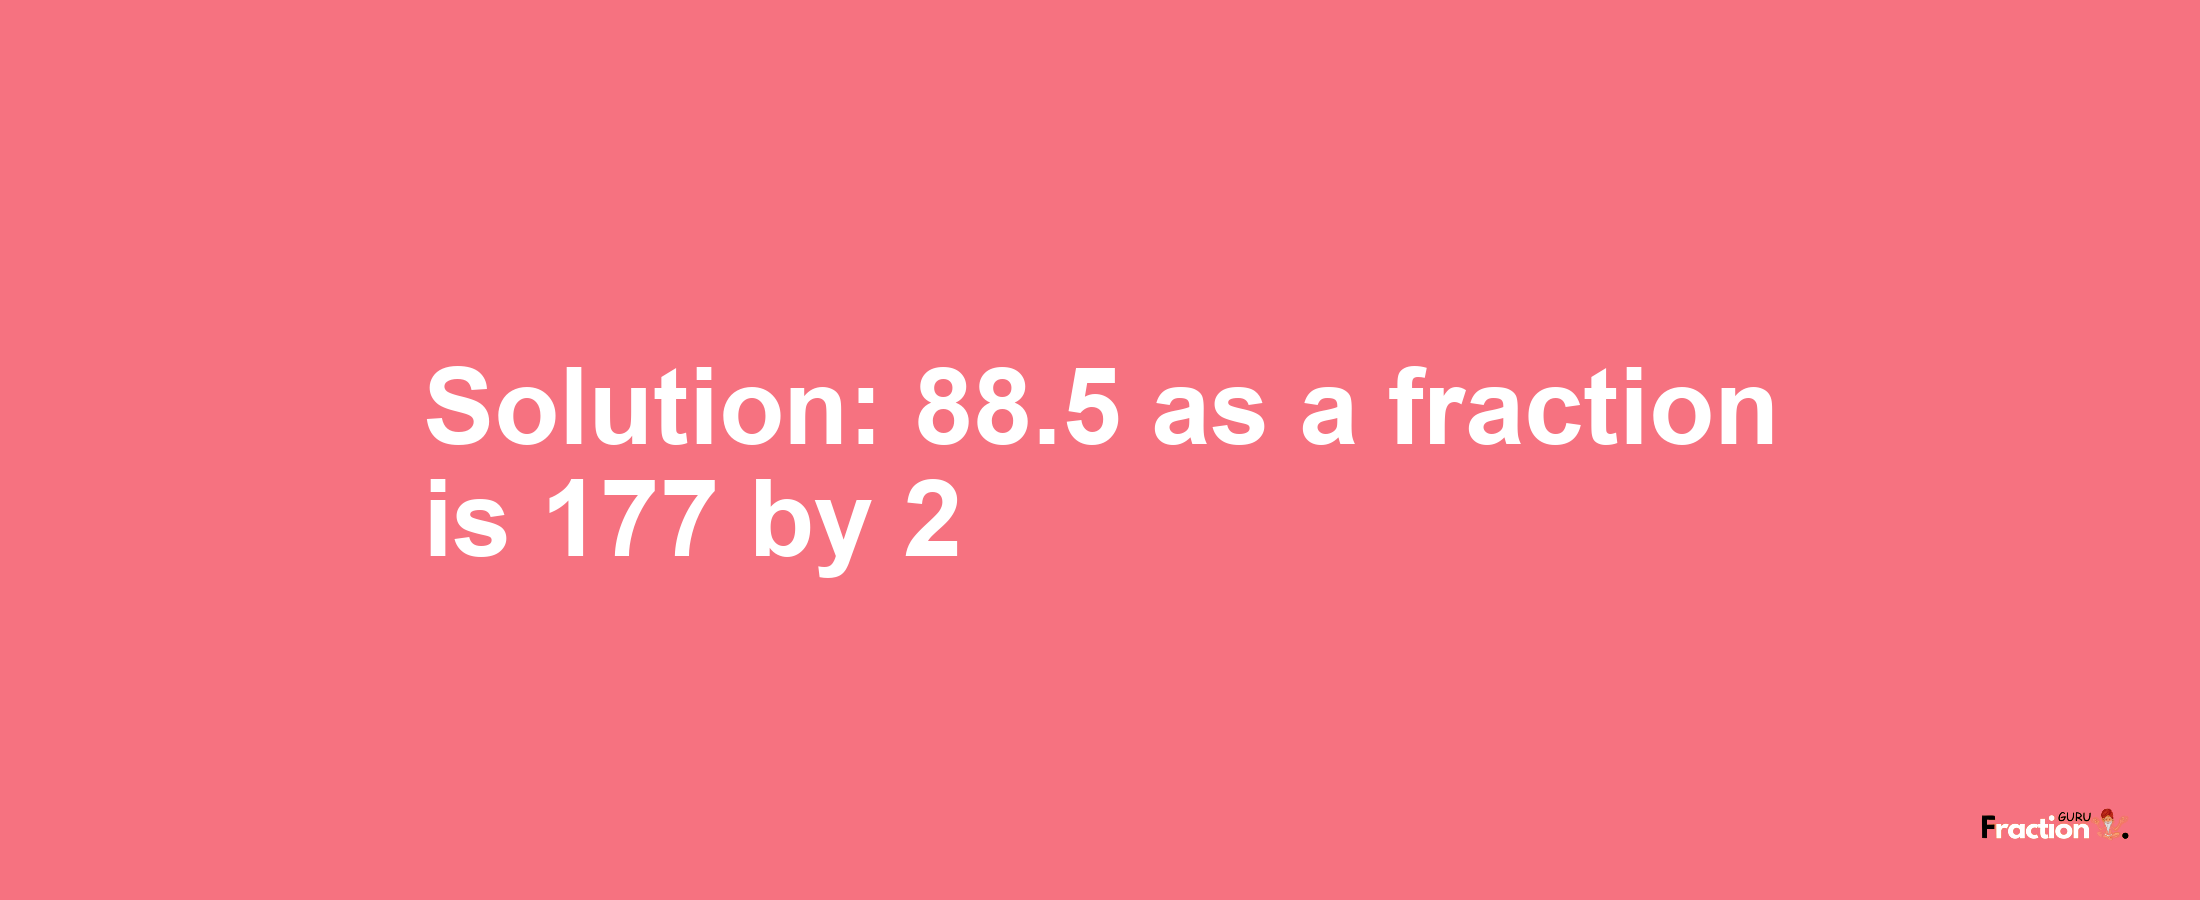 Solution:88.5 as a fraction is 177/2